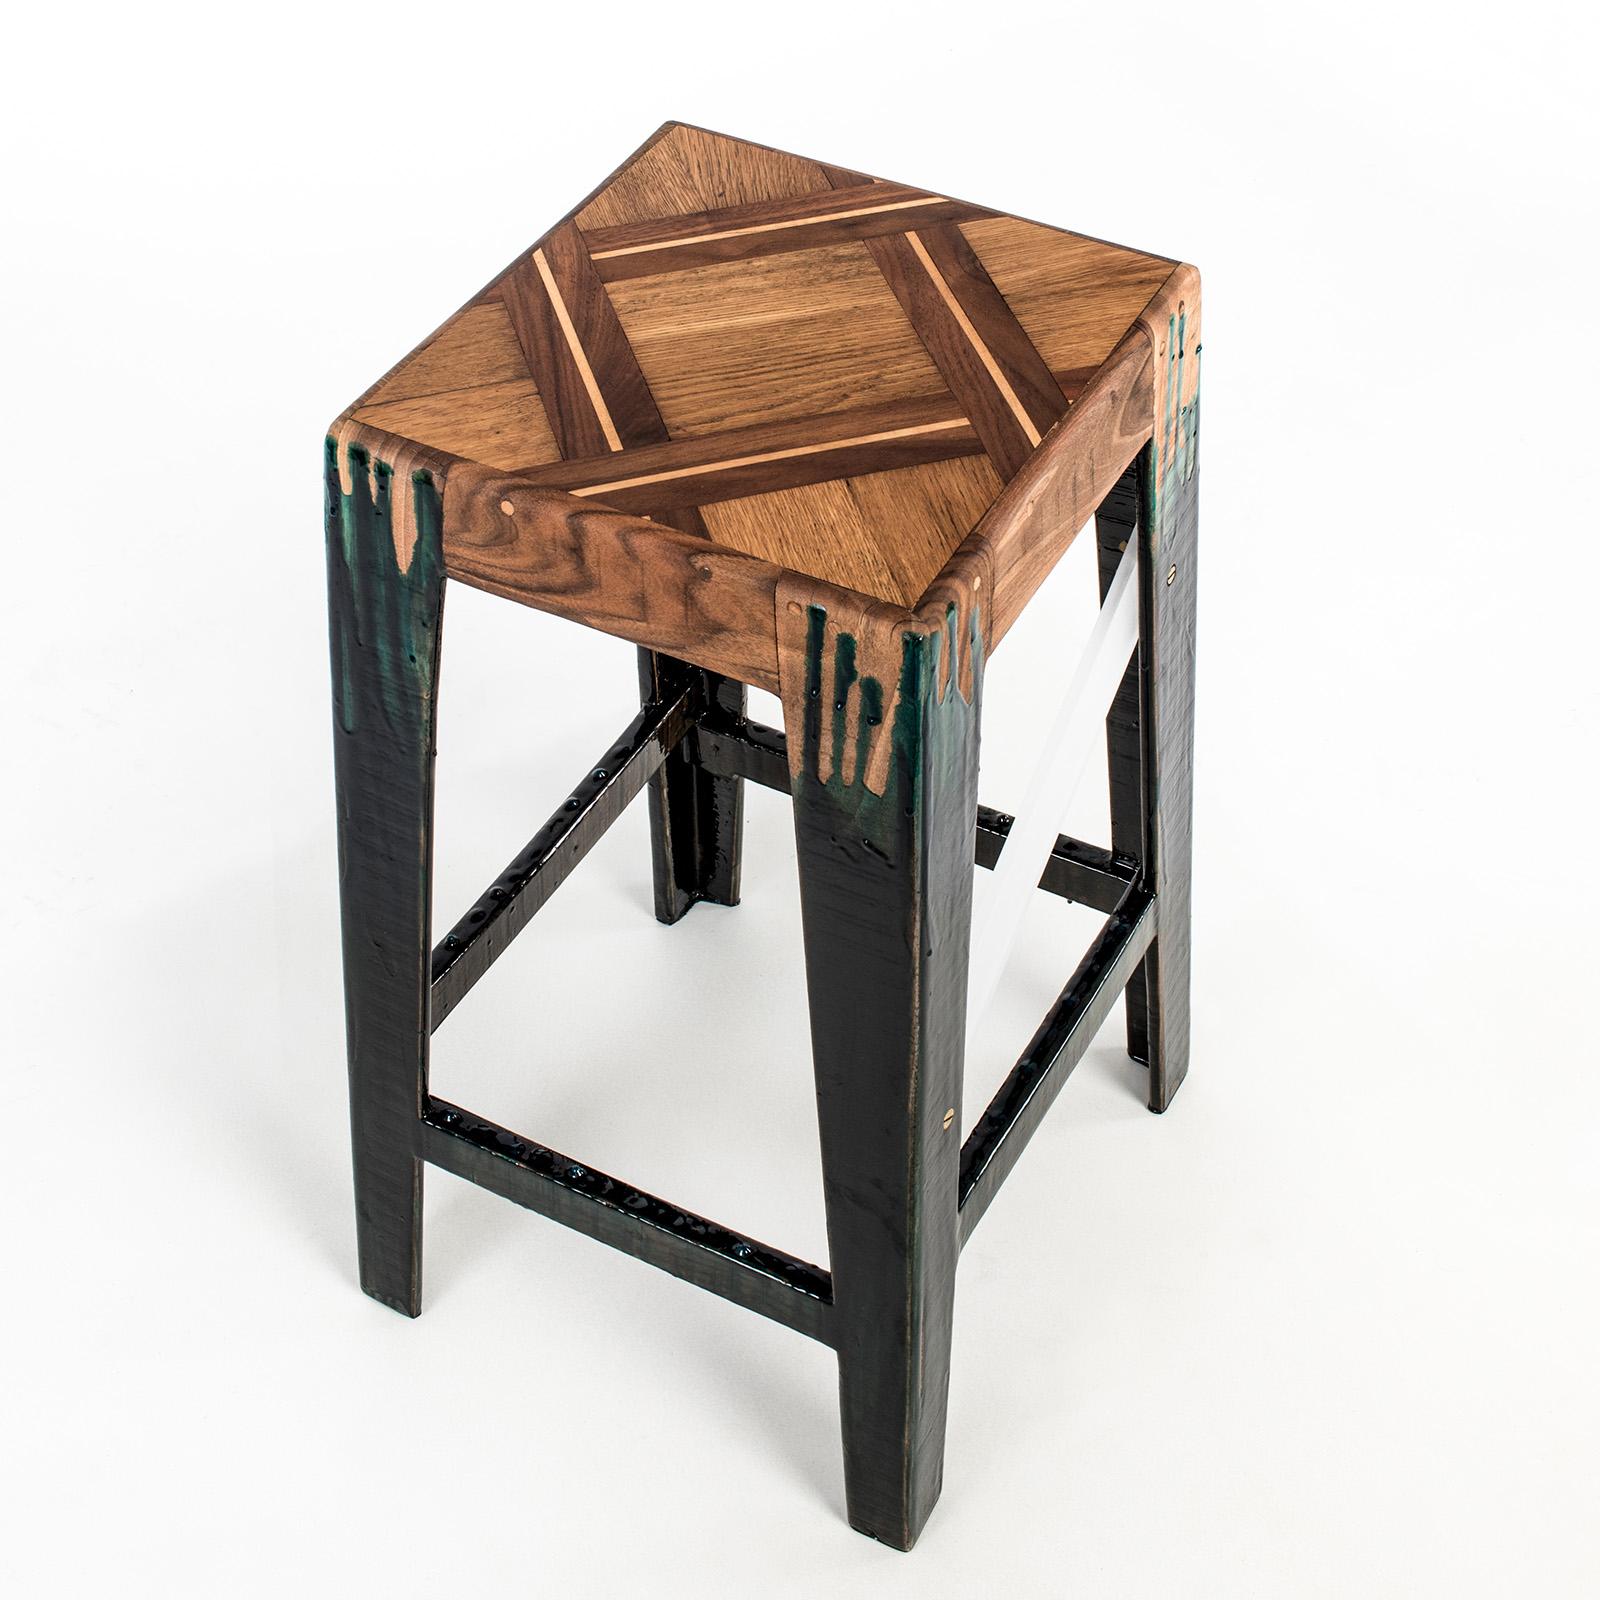 'Liquid' Wooden Stool in Walnut and Colored Resin by Hillsideout In New Condition For Sale In Milan, IT